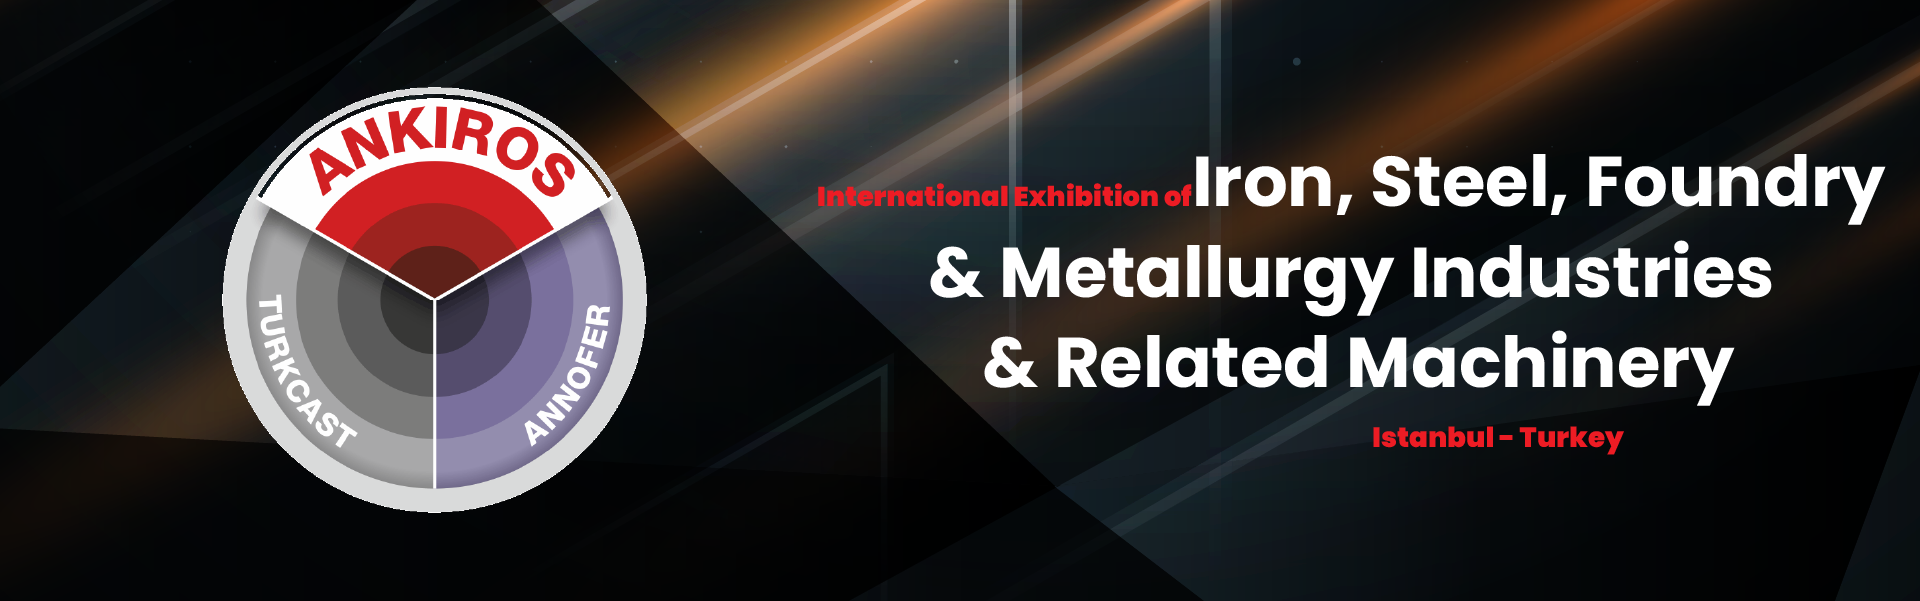 Iron Steel Foundry & Metallurgy Industries & Related Machinery Exhibition Istanbul Turkey